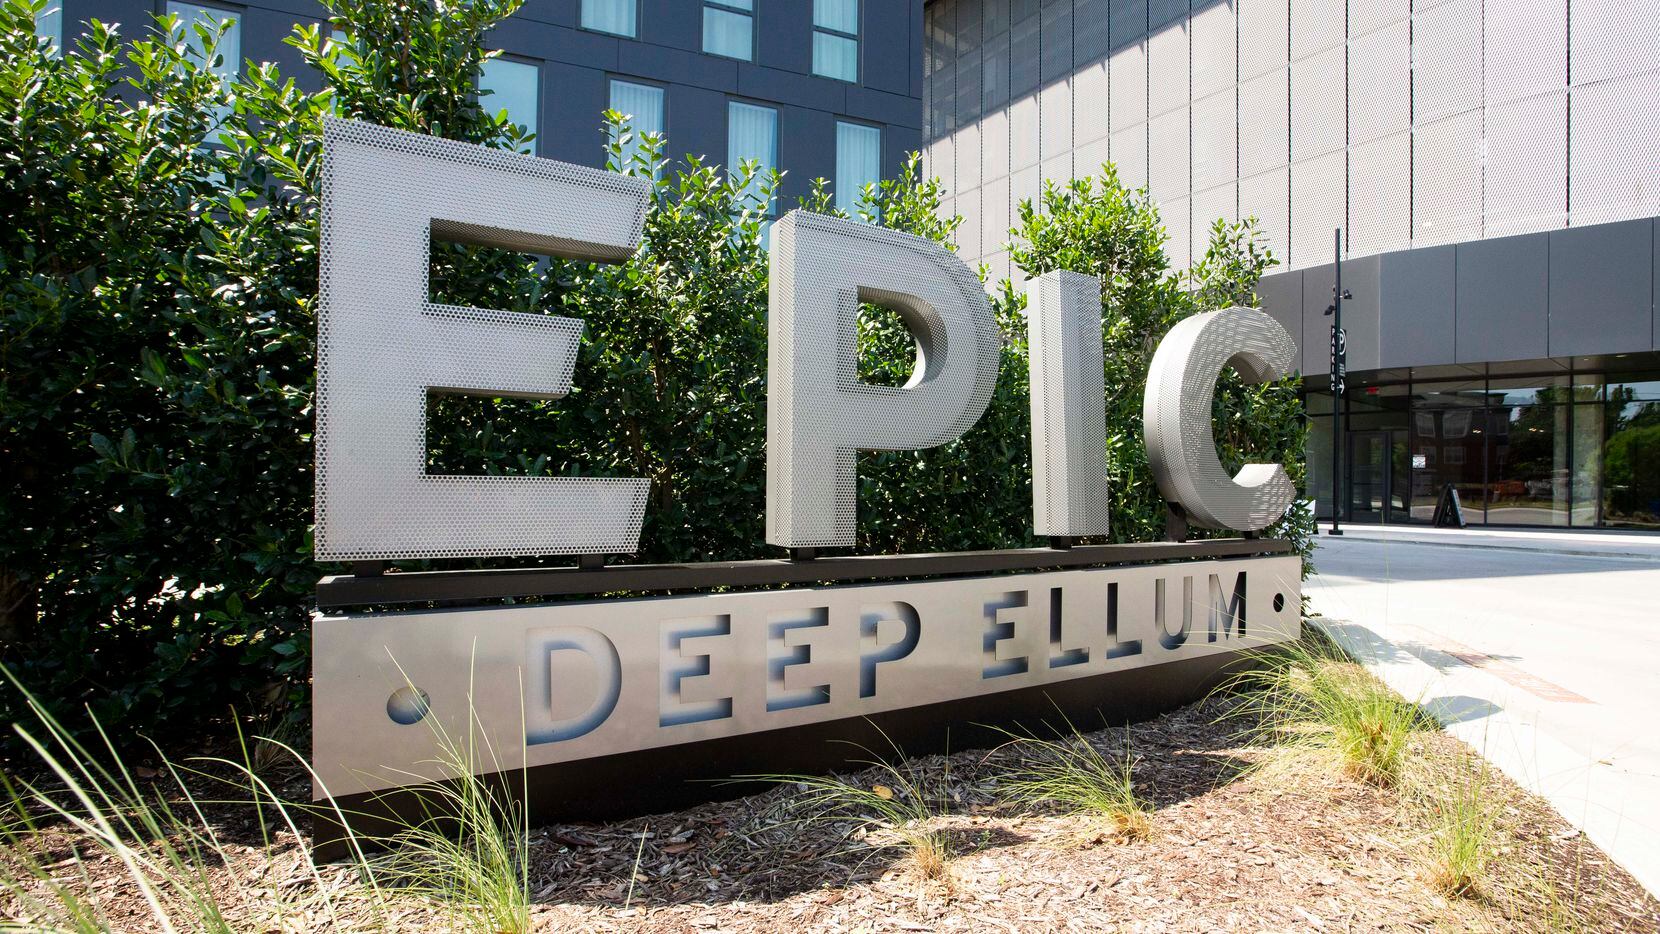 The Epic sign in Deep Ellum on July 7, 2021, in Dallas.